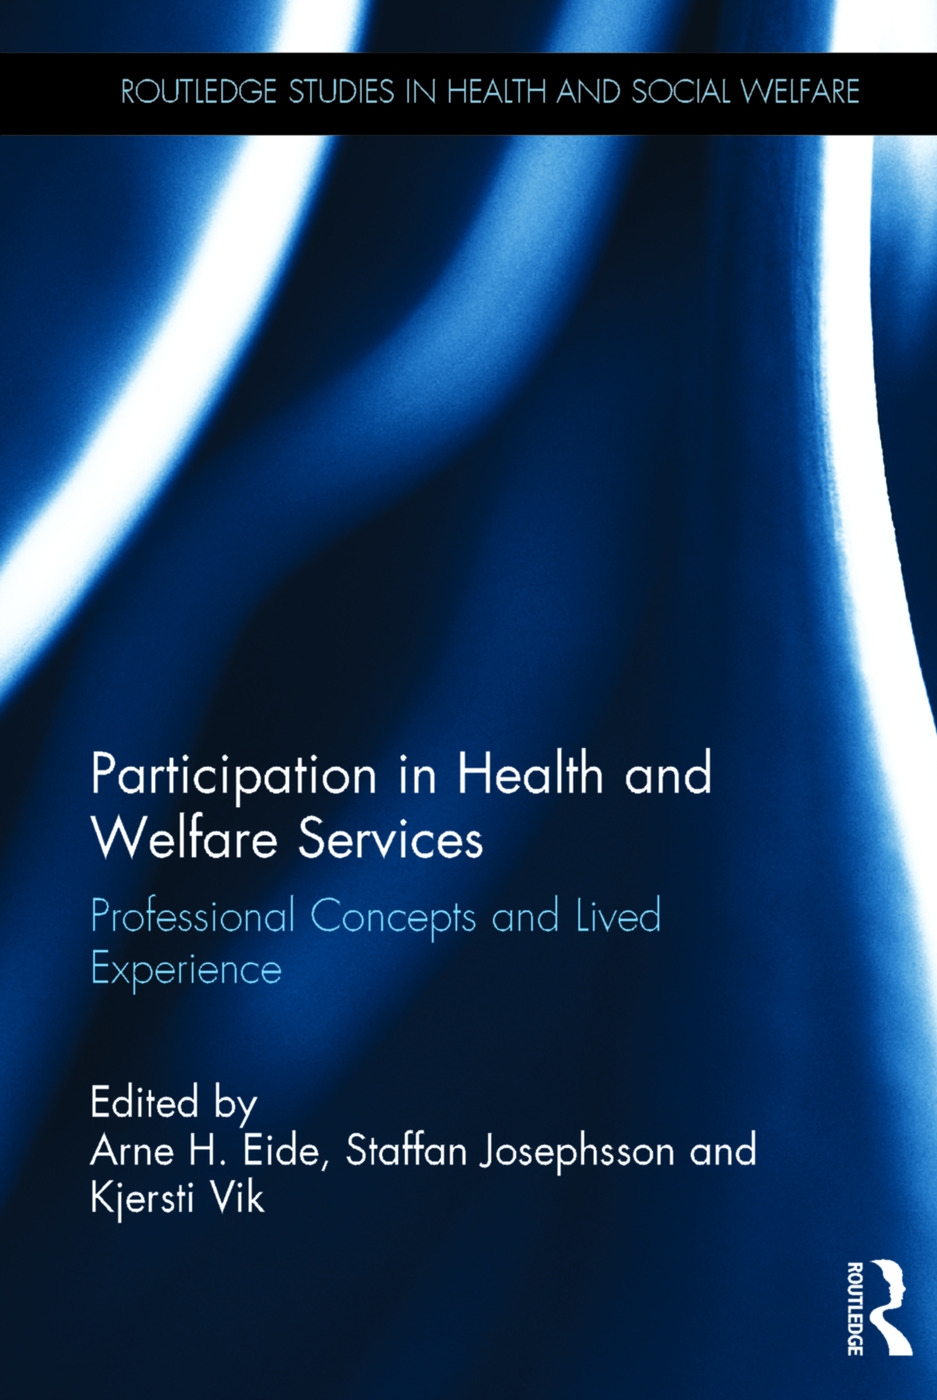 Participation in Health and Welfare Services: Professional Concepts and Lived Experience